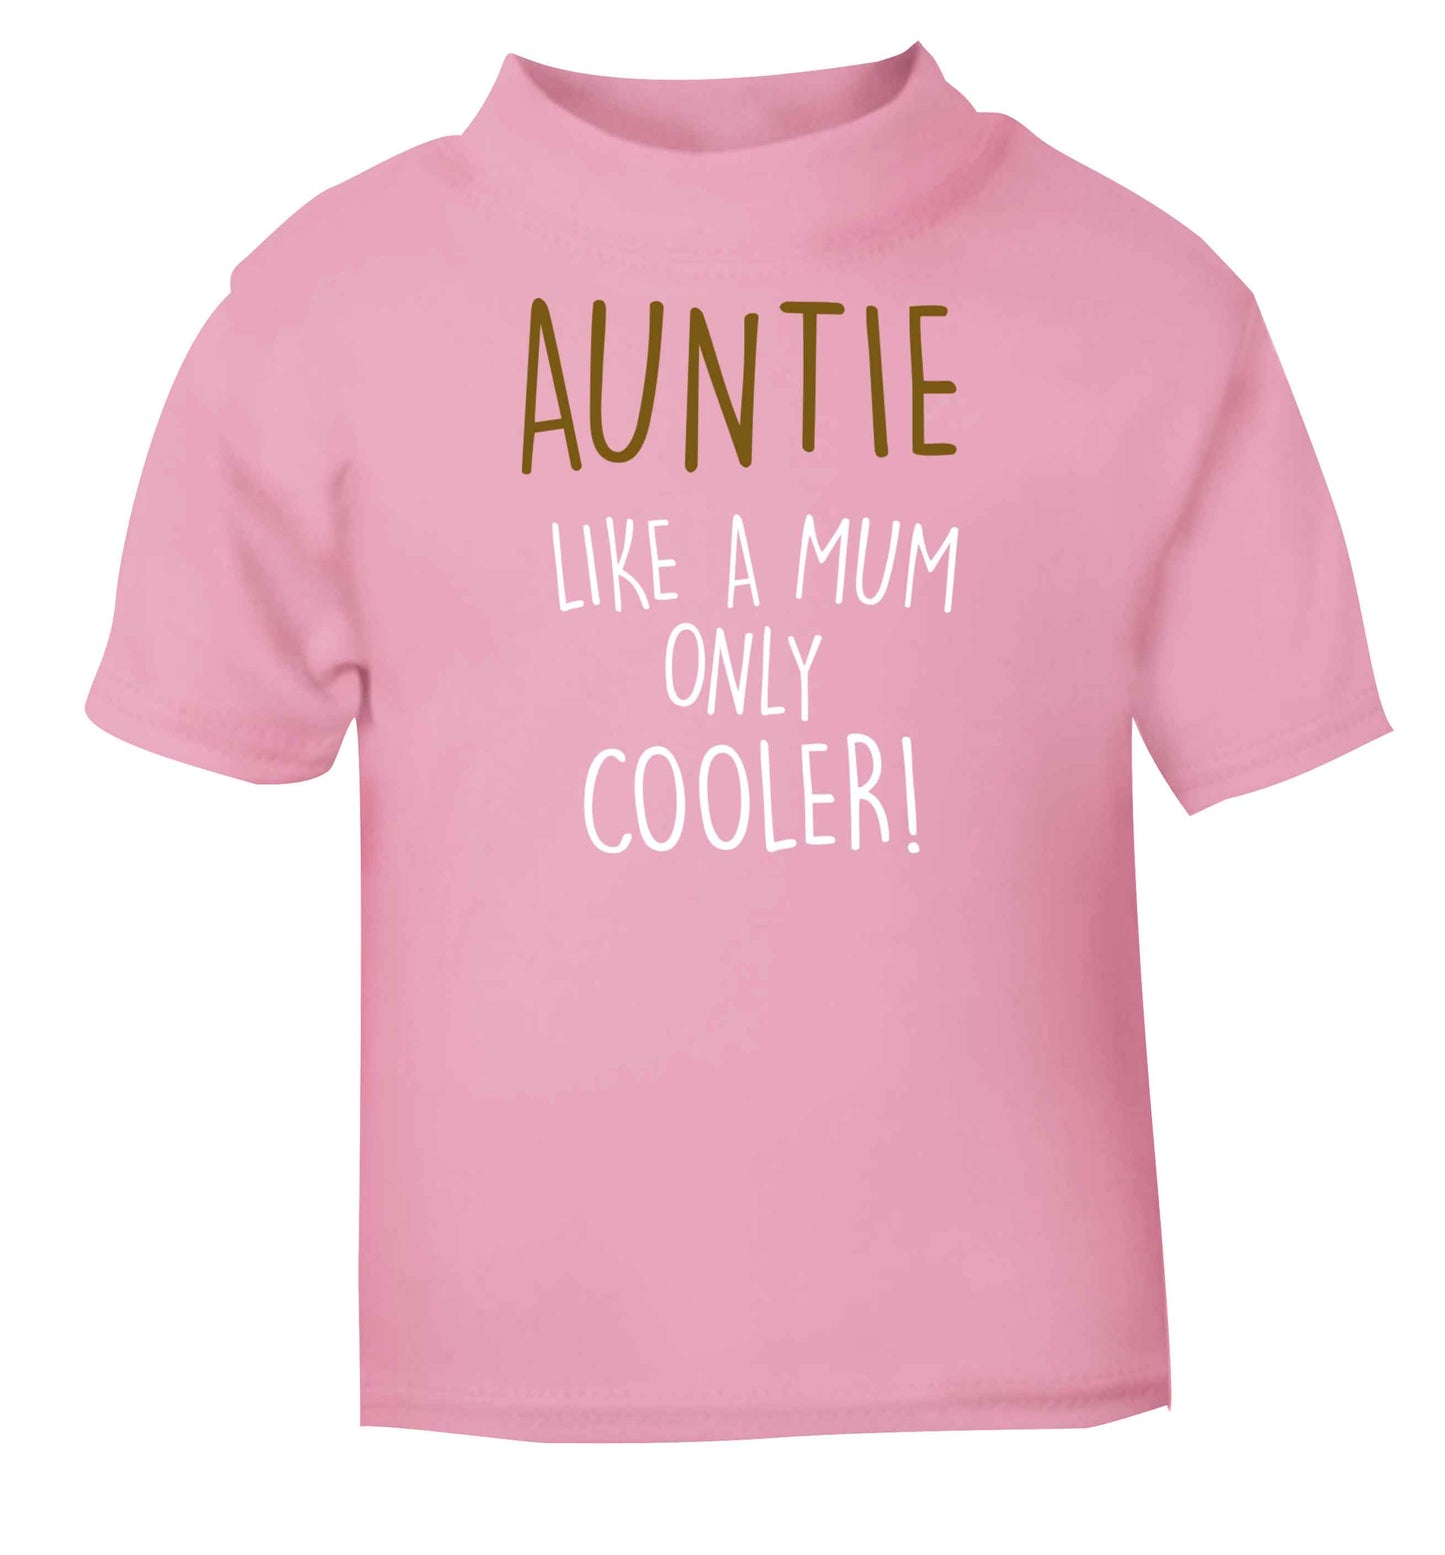 Auntie like a mum only cooler light pink baby toddler Tshirt 2 Years